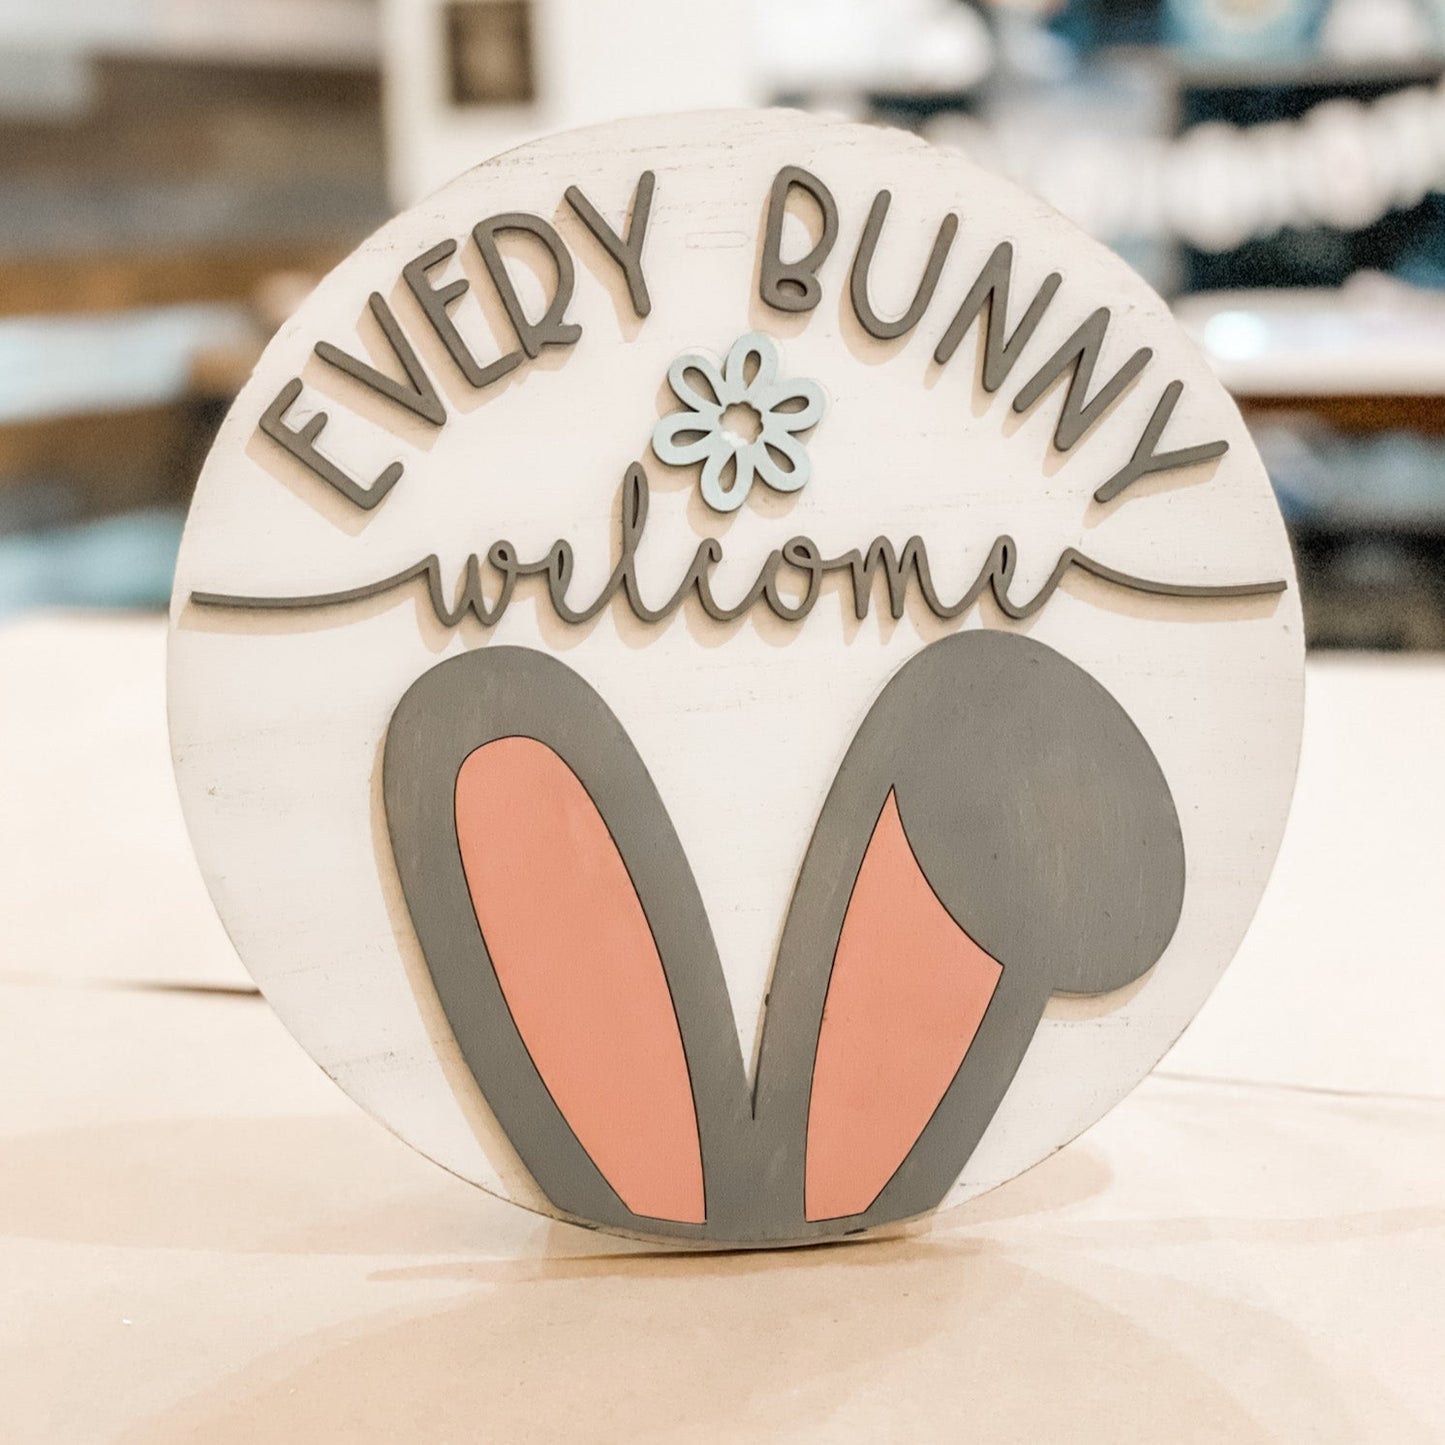 Every Bunny Welcome: 3D Round Design & Swappable Design - Paisley Grace Makery